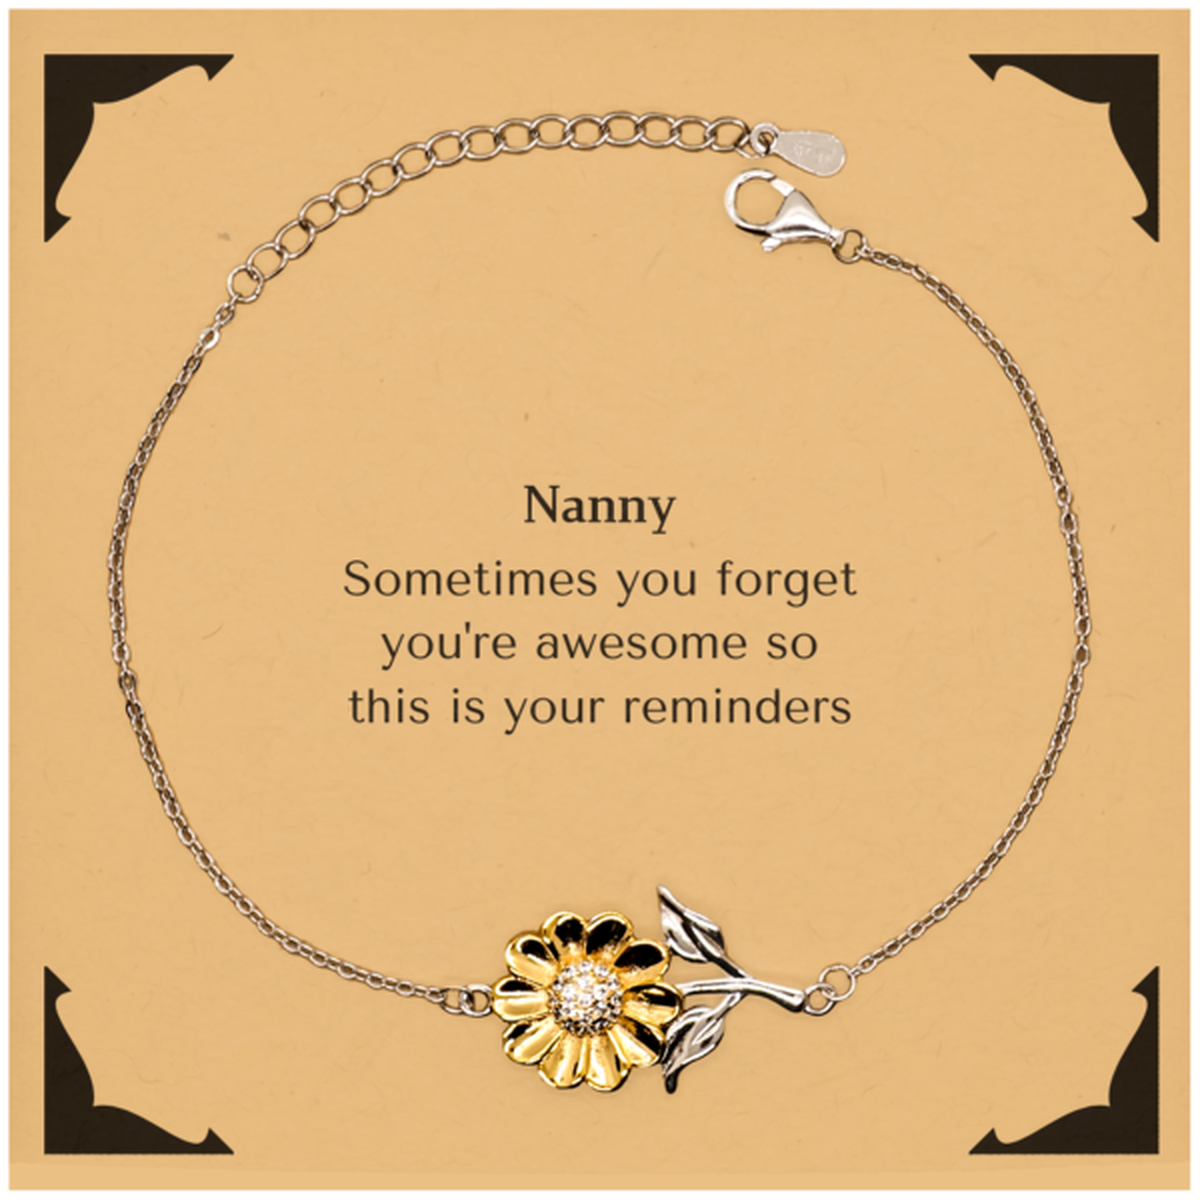 Sentimental Nanny Sunflower Bracelet, Nanny Sometimes you forget you're awesome so this is your reminders, Graduation Christmas Birthday Gifts for Nanny, Men, Women, Coworkers